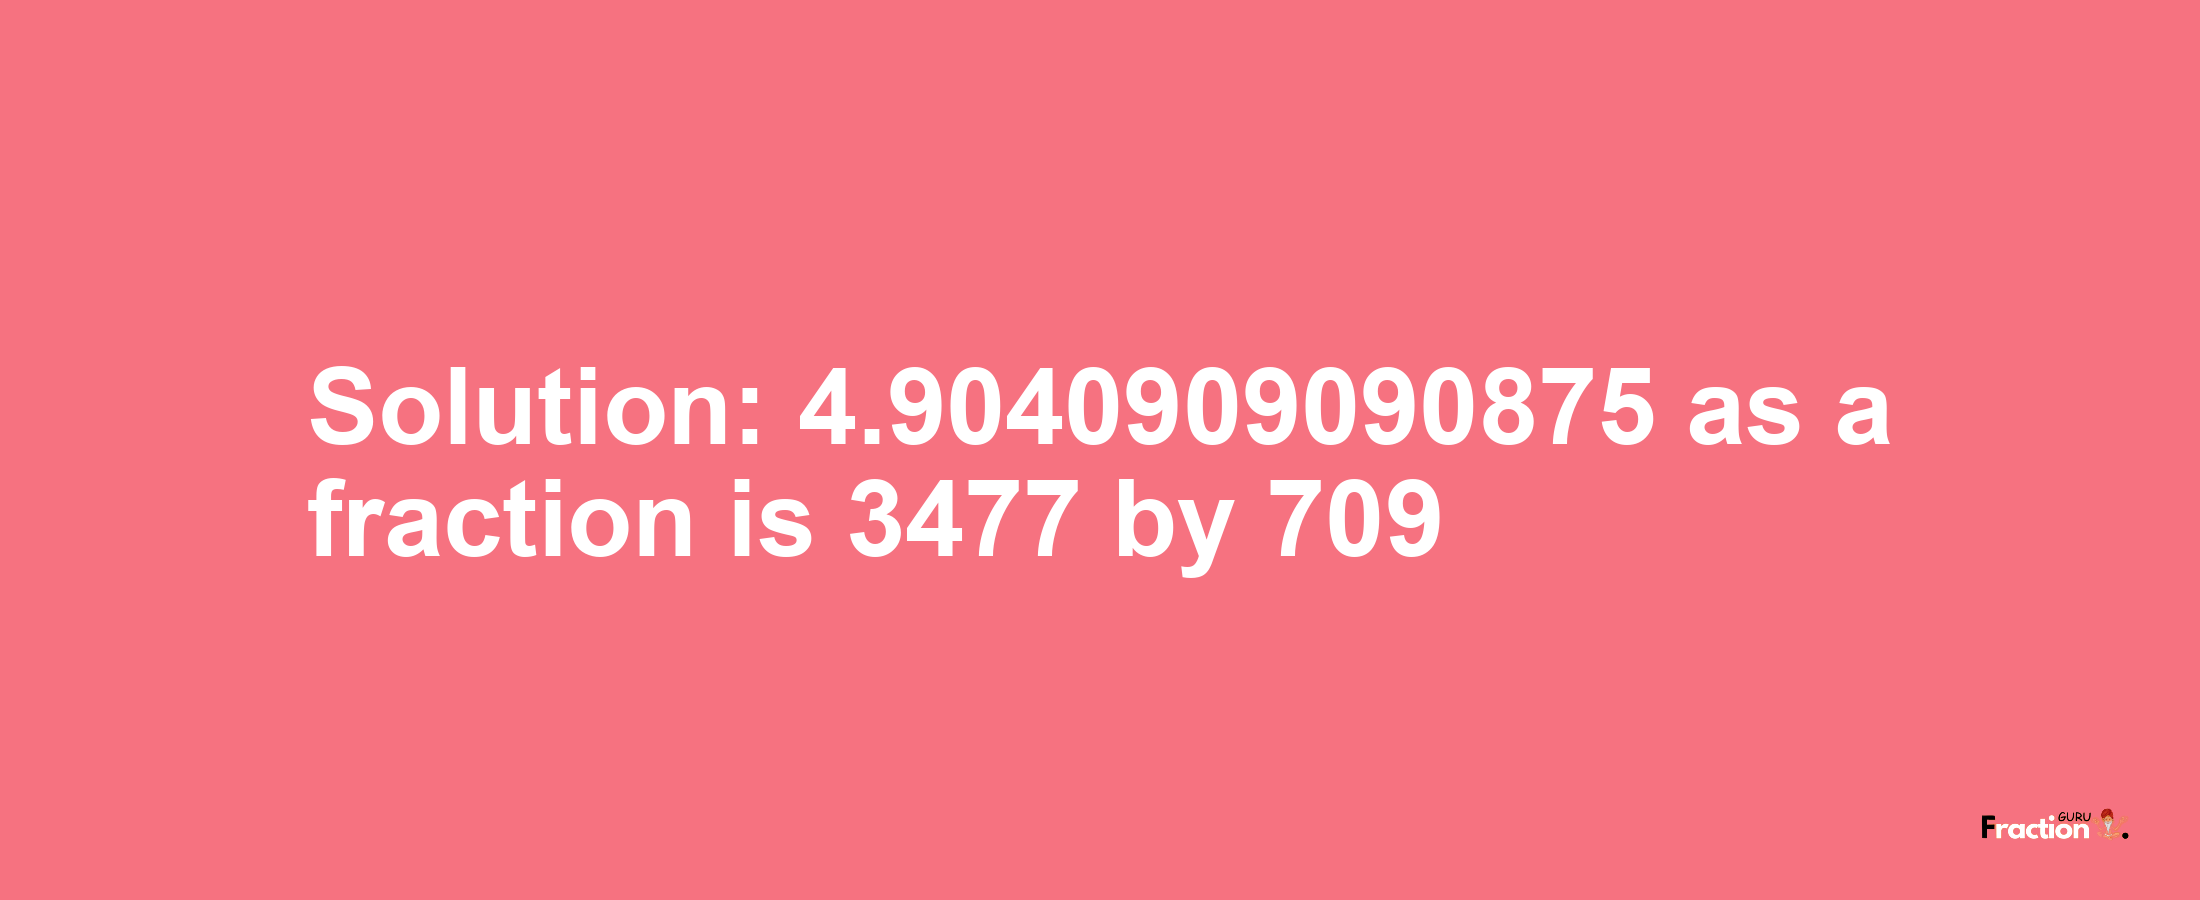 Solution:4.9040909090875 as a fraction is 3477/709